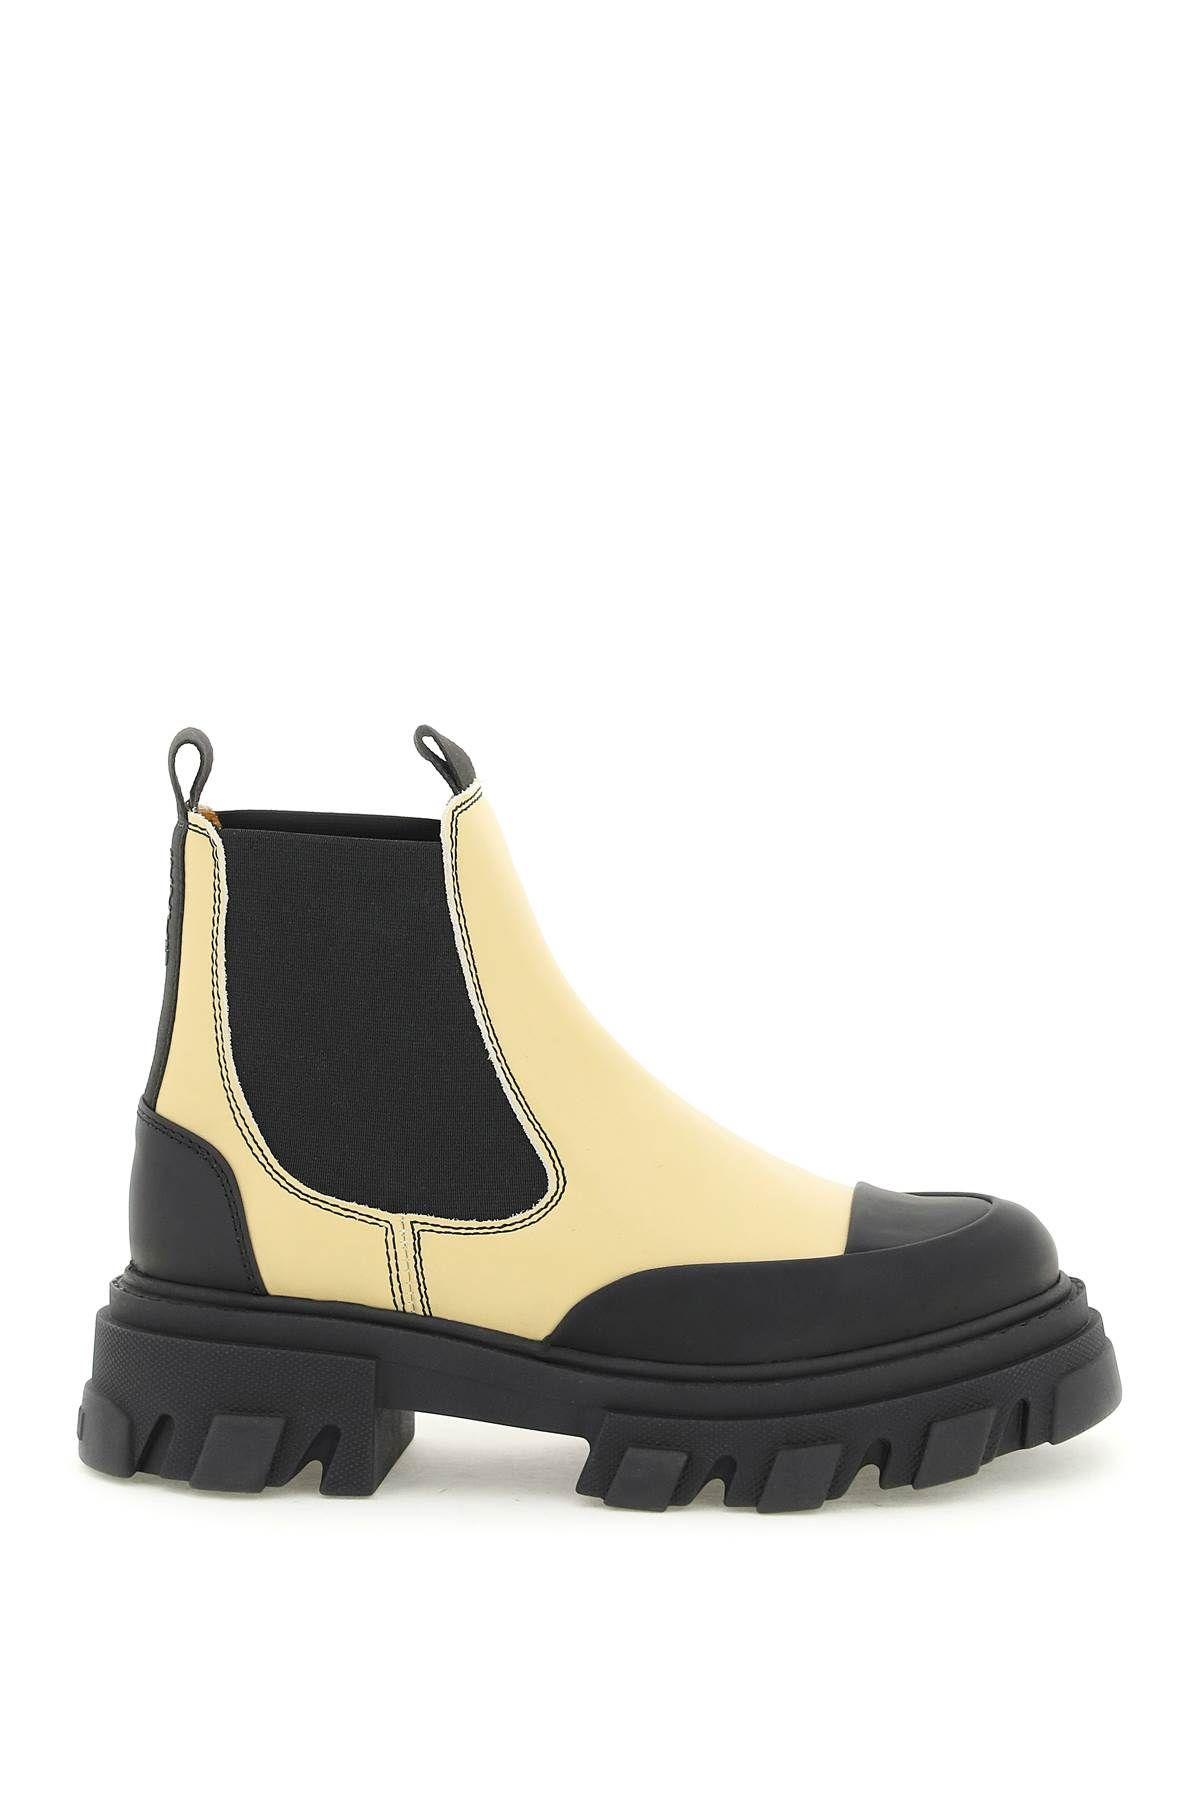 GANNI CHELSEA ANKLE BOOTS